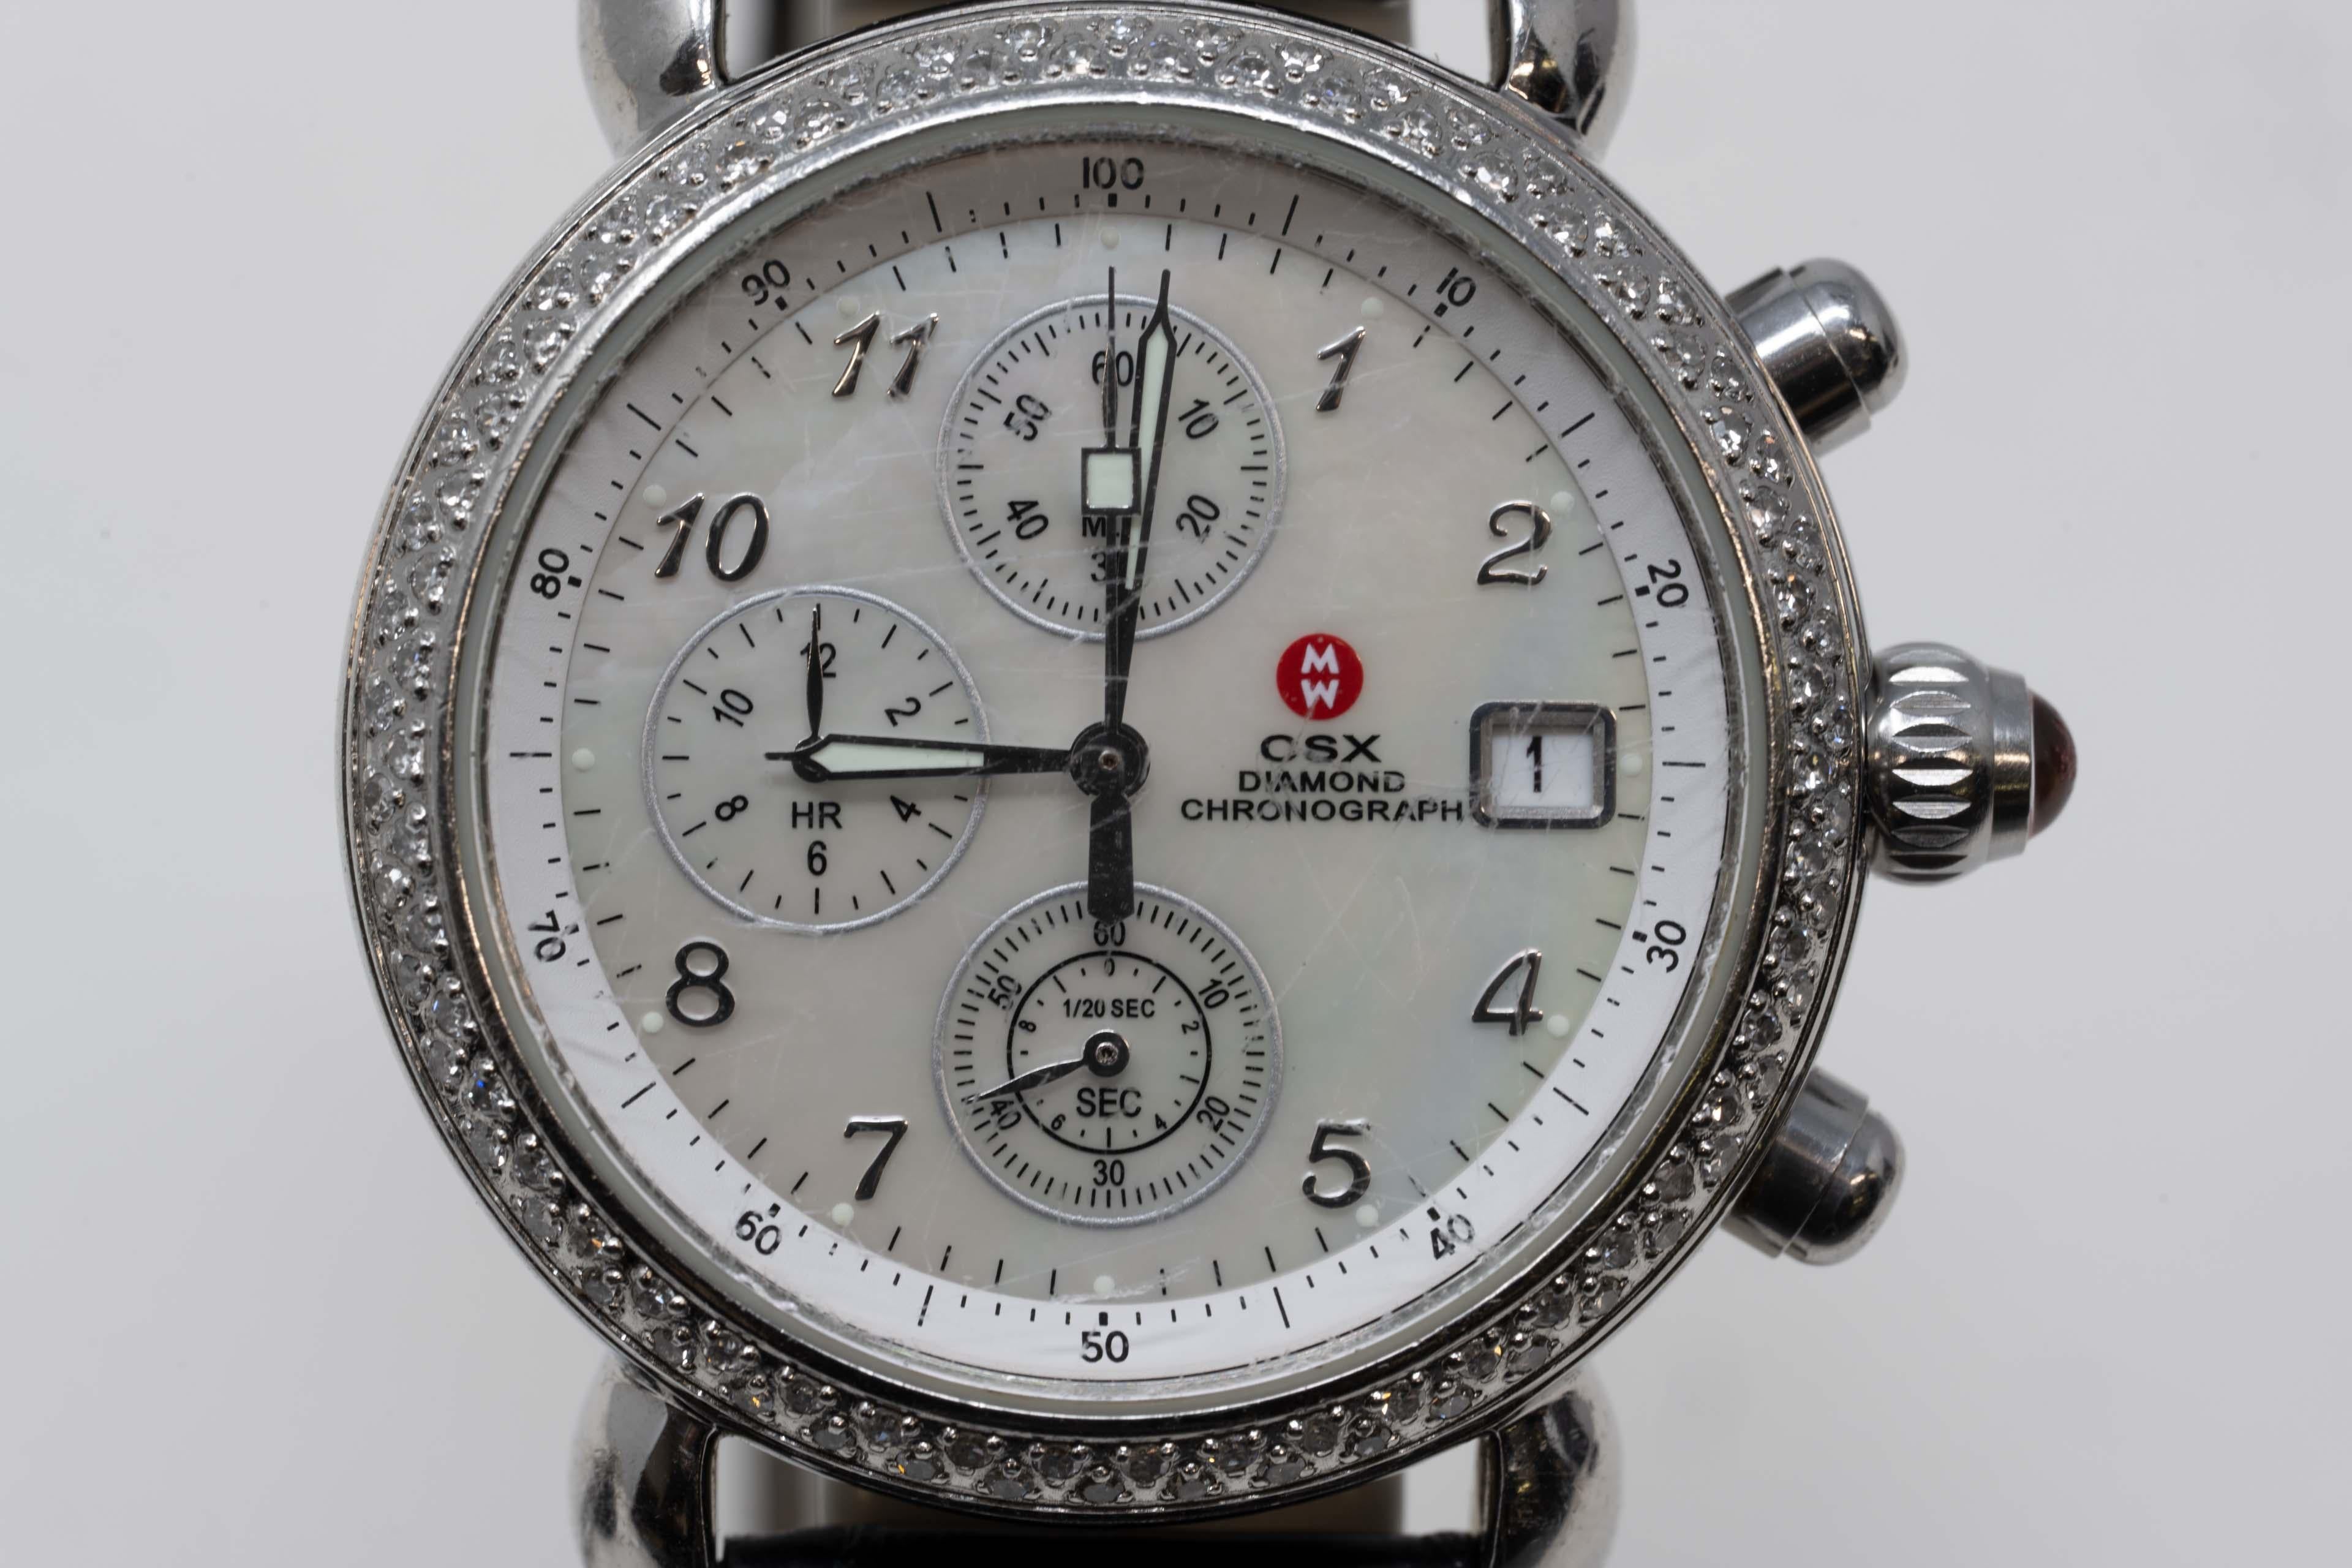 Michele C S X diamond chronograph quartz leather band watch. The watch has a mother-of-pearl tone dial watch with genuine diamond jewels and stainless steel. The strap is leather and equipped with an adjustable buckle clasp.